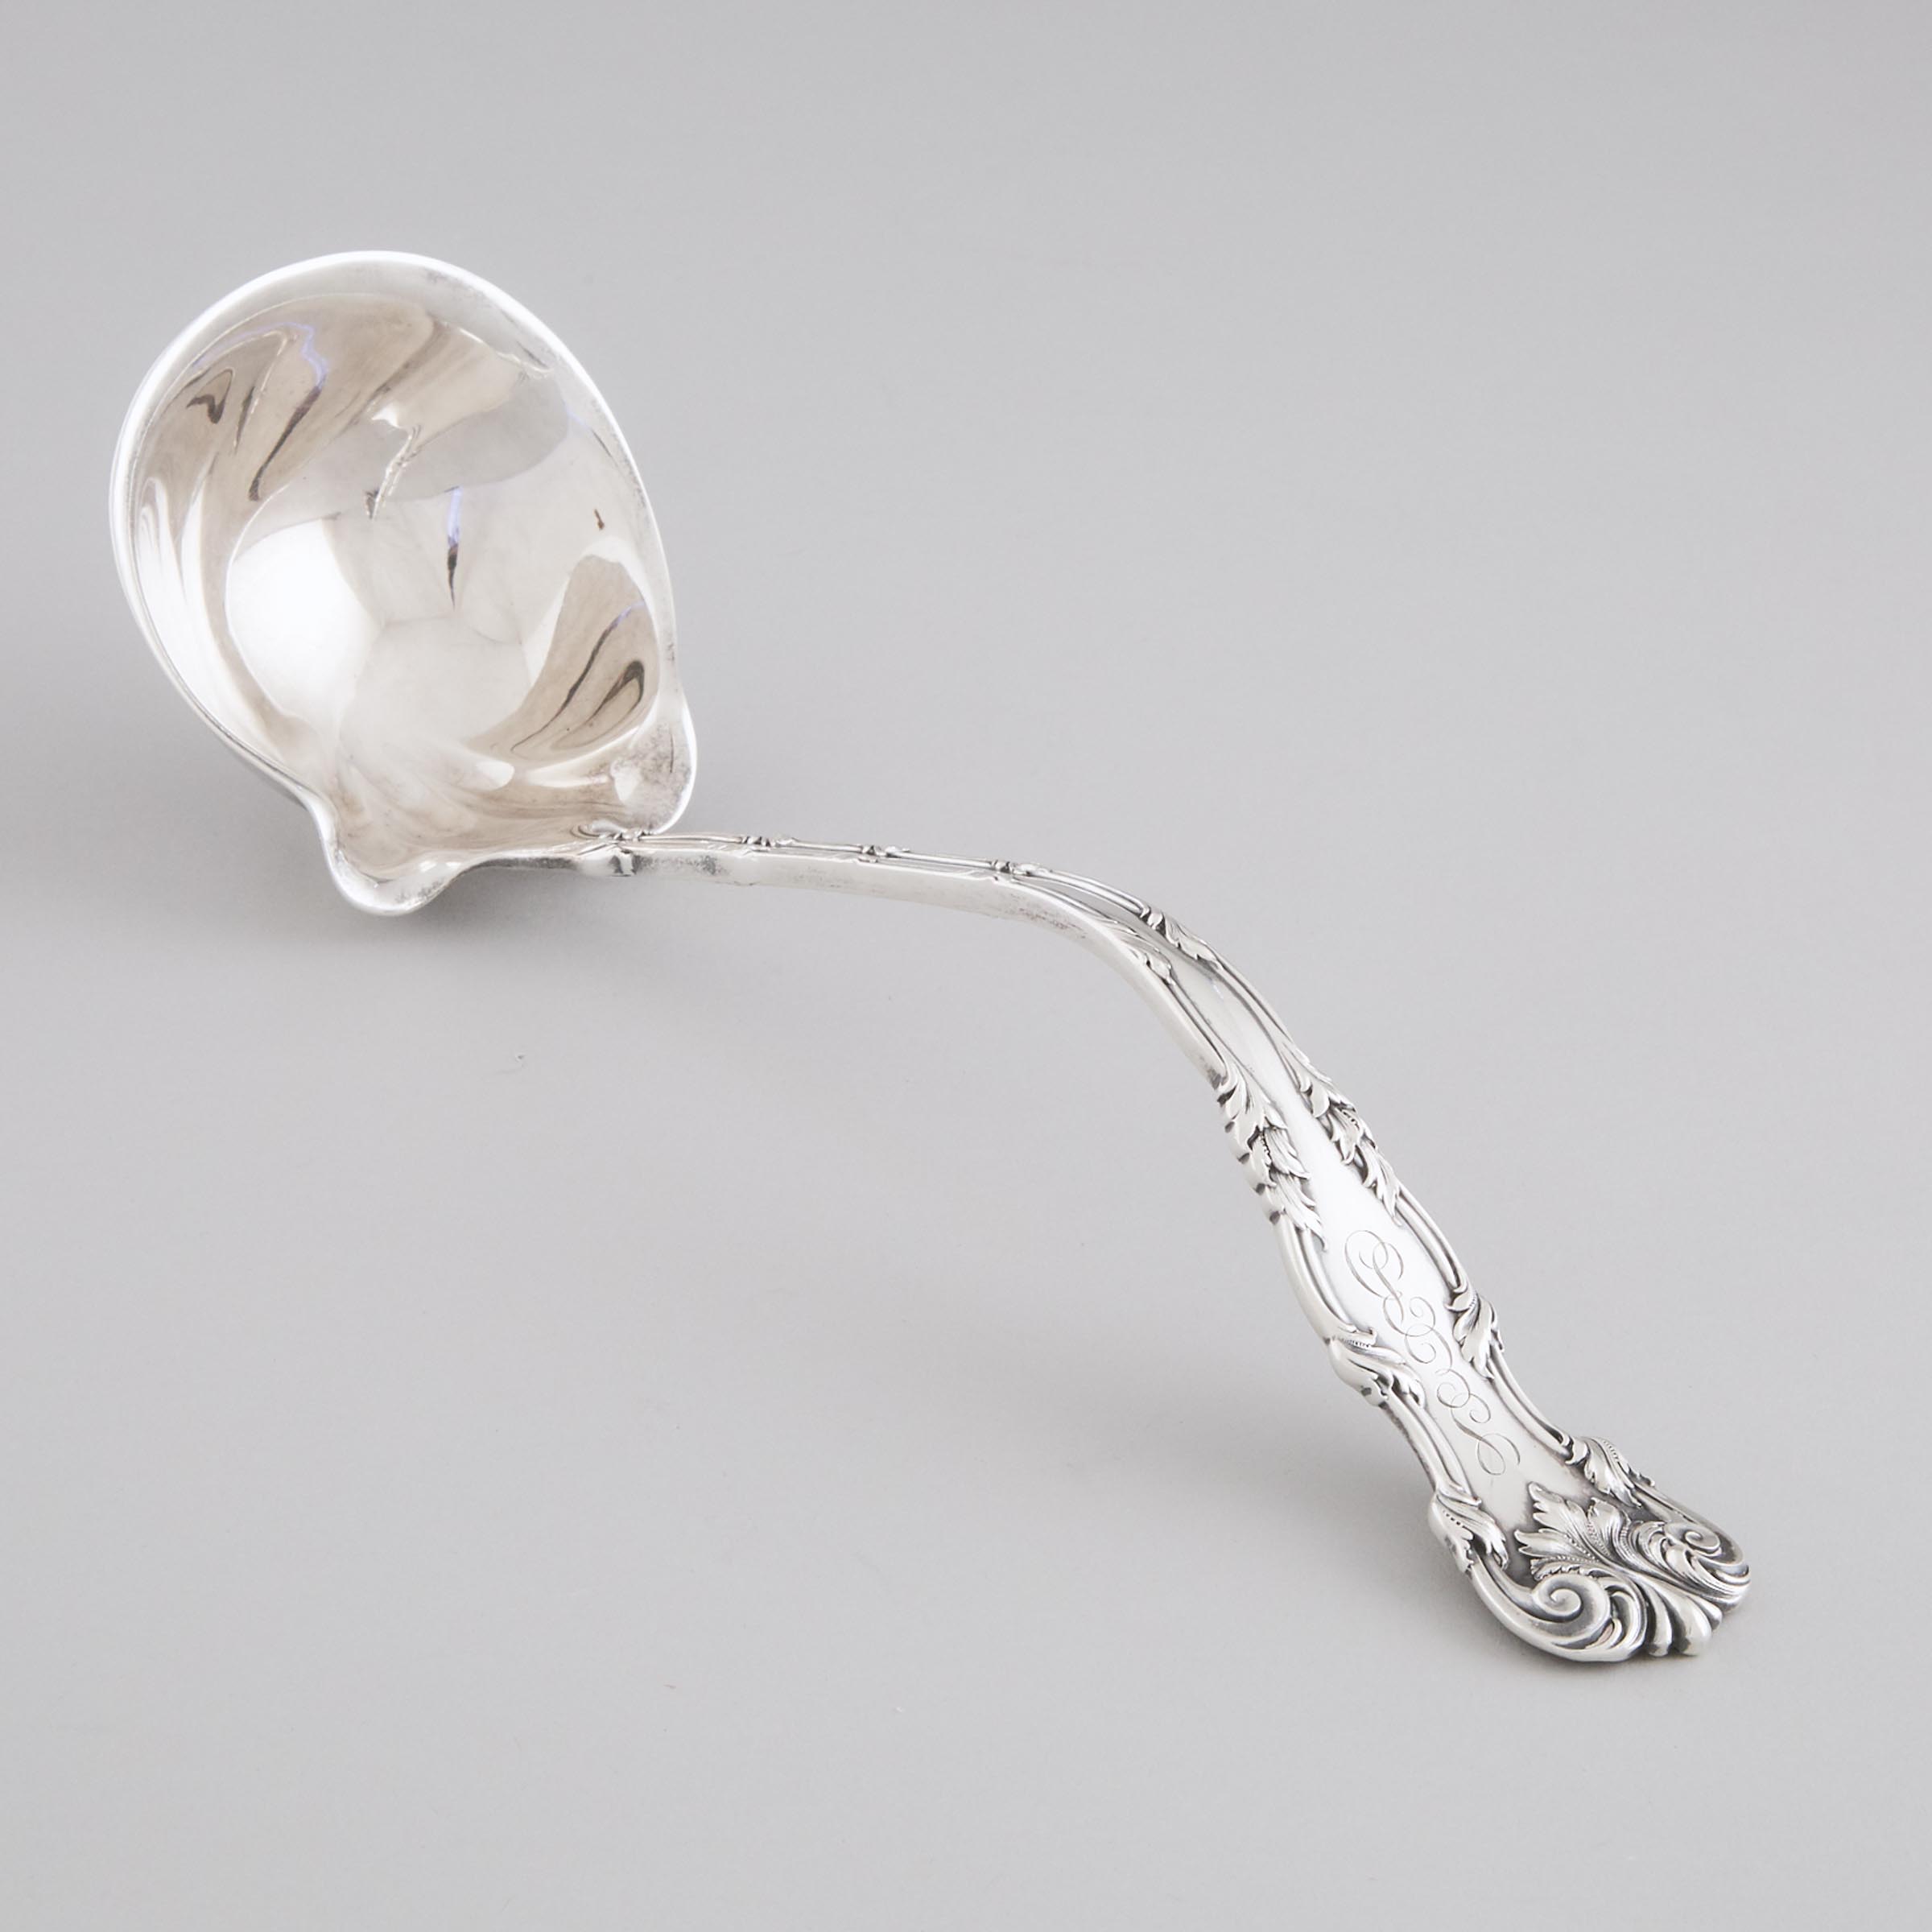 American Silver Soup Ladle, Dominick & Haff, New York, N.Y., early   20th century